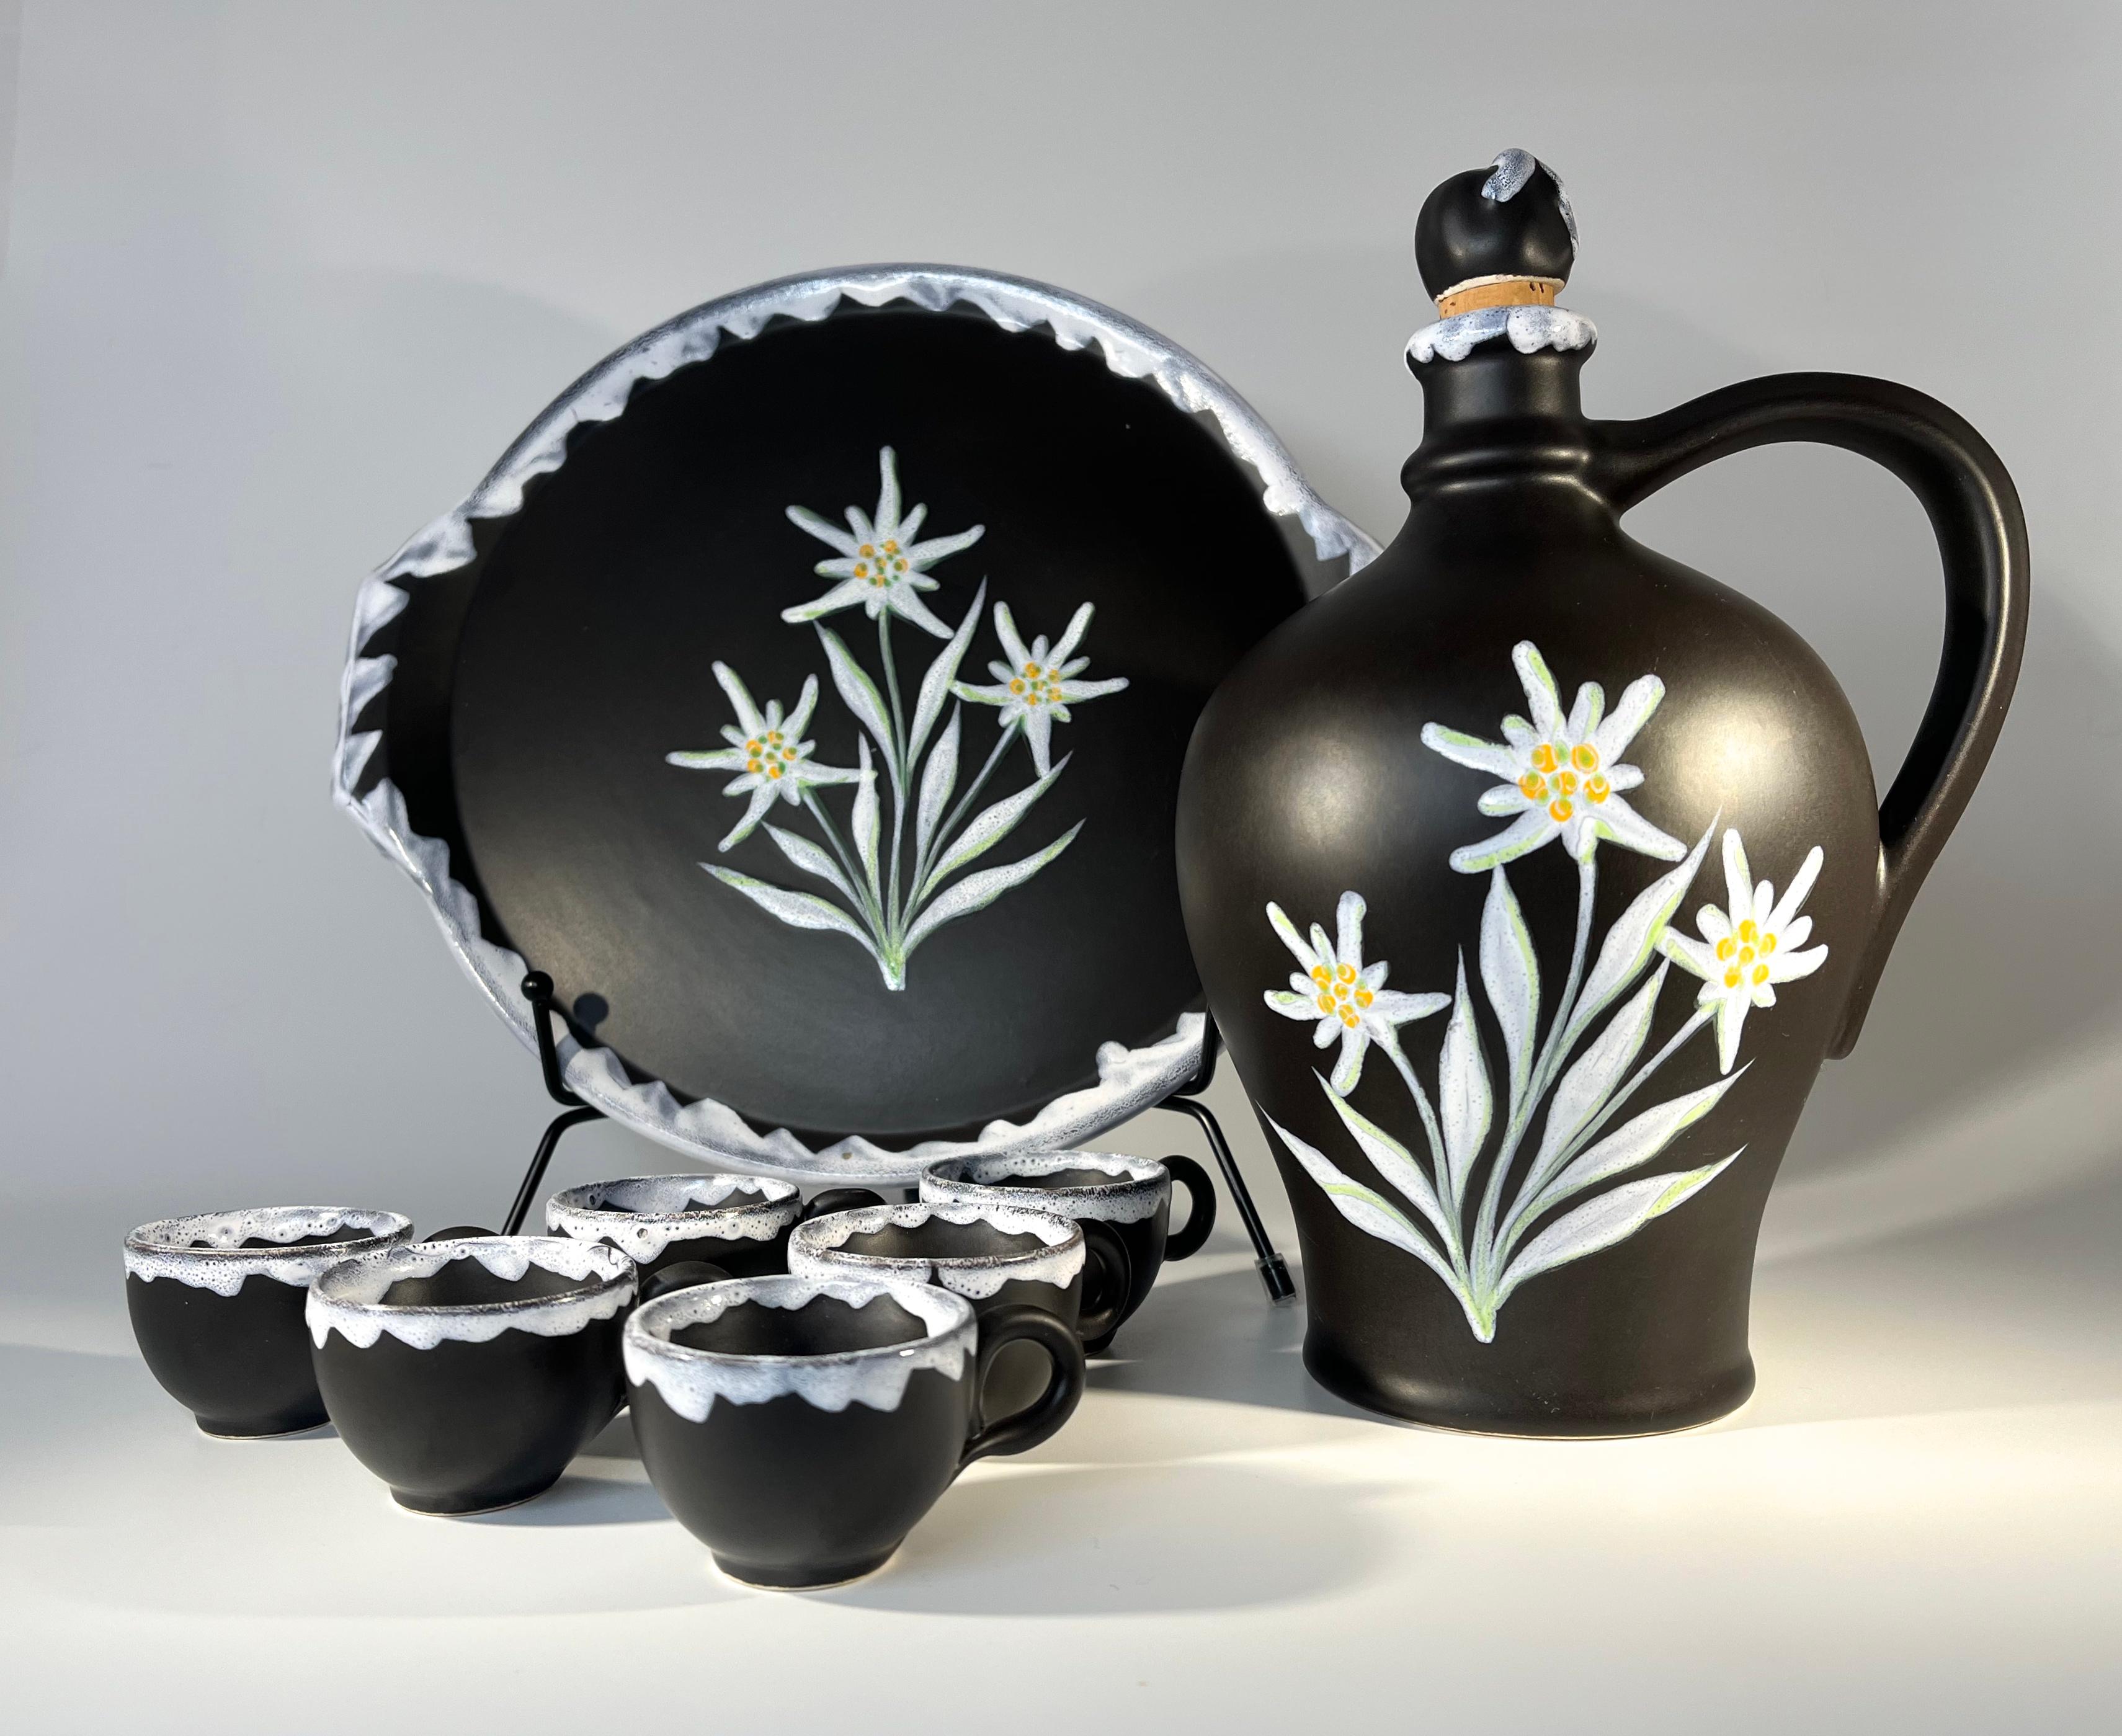 Celebrated ceramicist Gabriel Fourmaintraux  black and white ceramic liqueur decanter, cups and tray set
Elegant hand painted Edelweiss flowers adorn the decanter and tray 
Six petite companion cups, black with white lava rims
Circa 1950's  
Signed